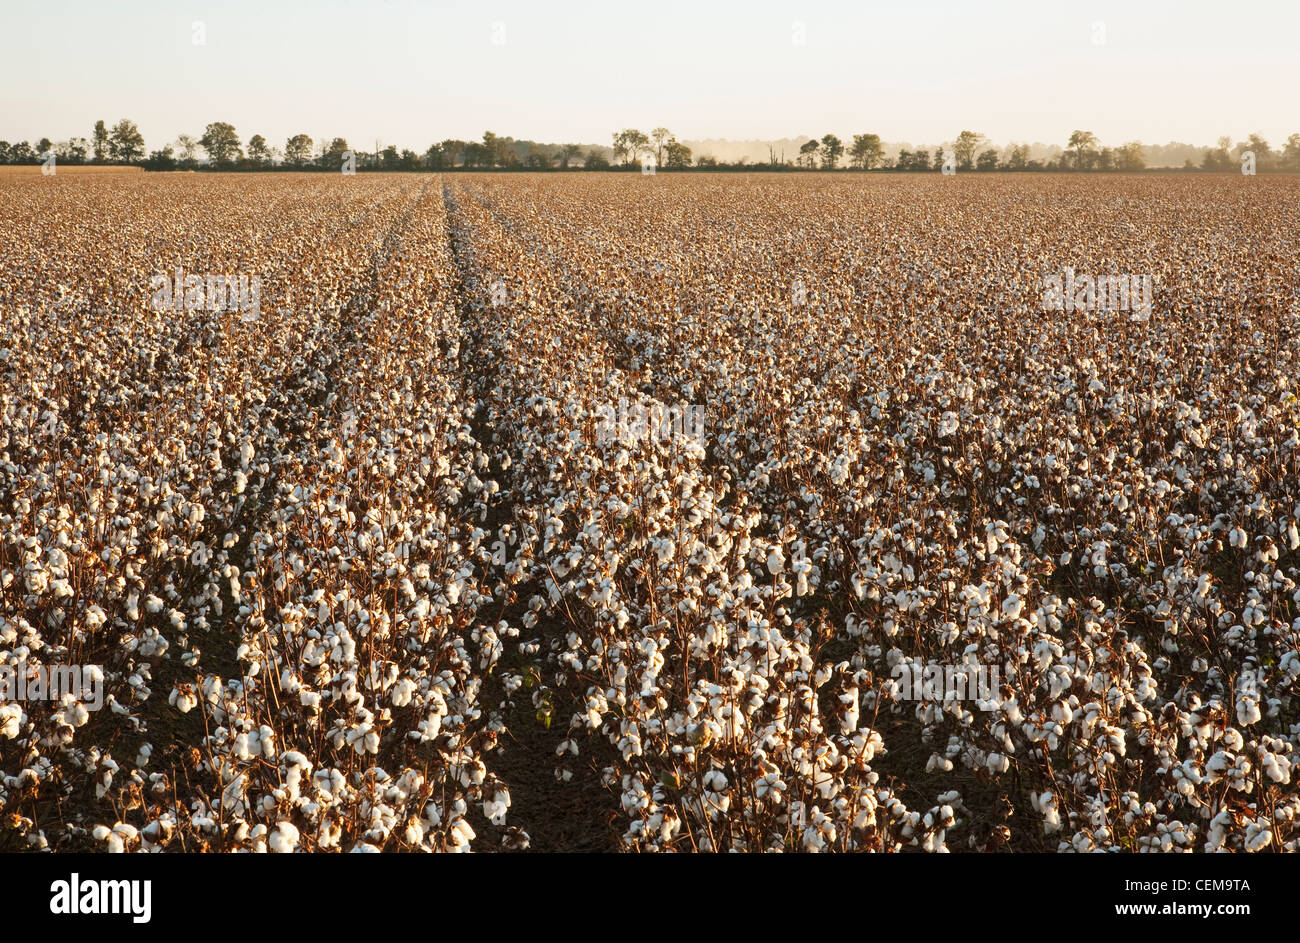 Large field of mature defoliated cotton plants at harvest stage in late afternoon Autumn light / near Little Rock, Arkansas, USA Stock Photo